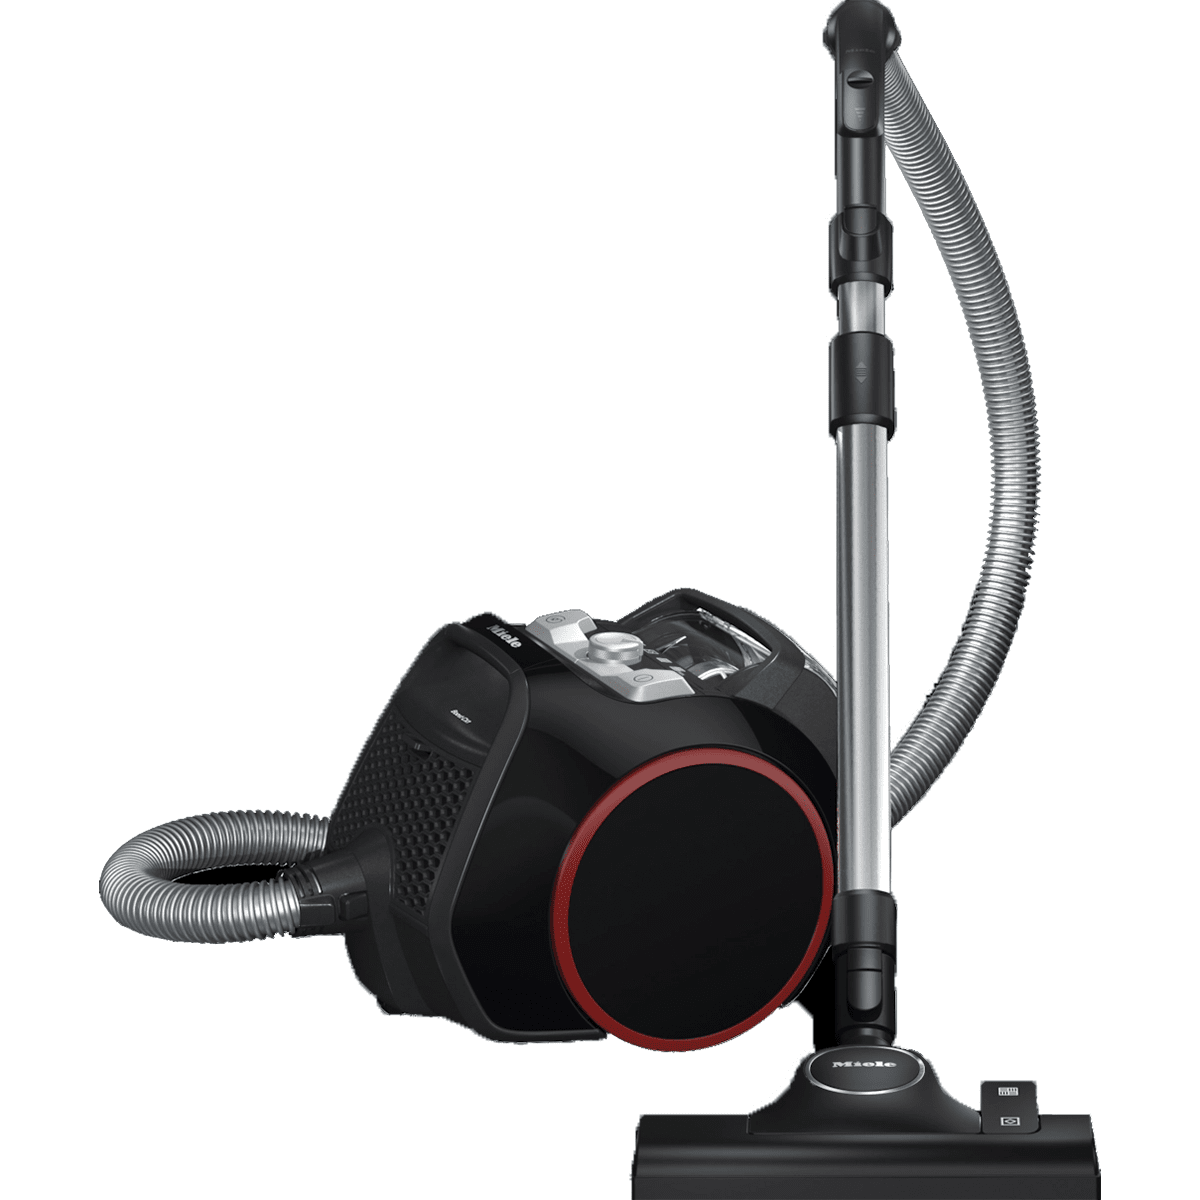 Miele CX1 Boost Bagless Canister Vacuum - Obsidian Black